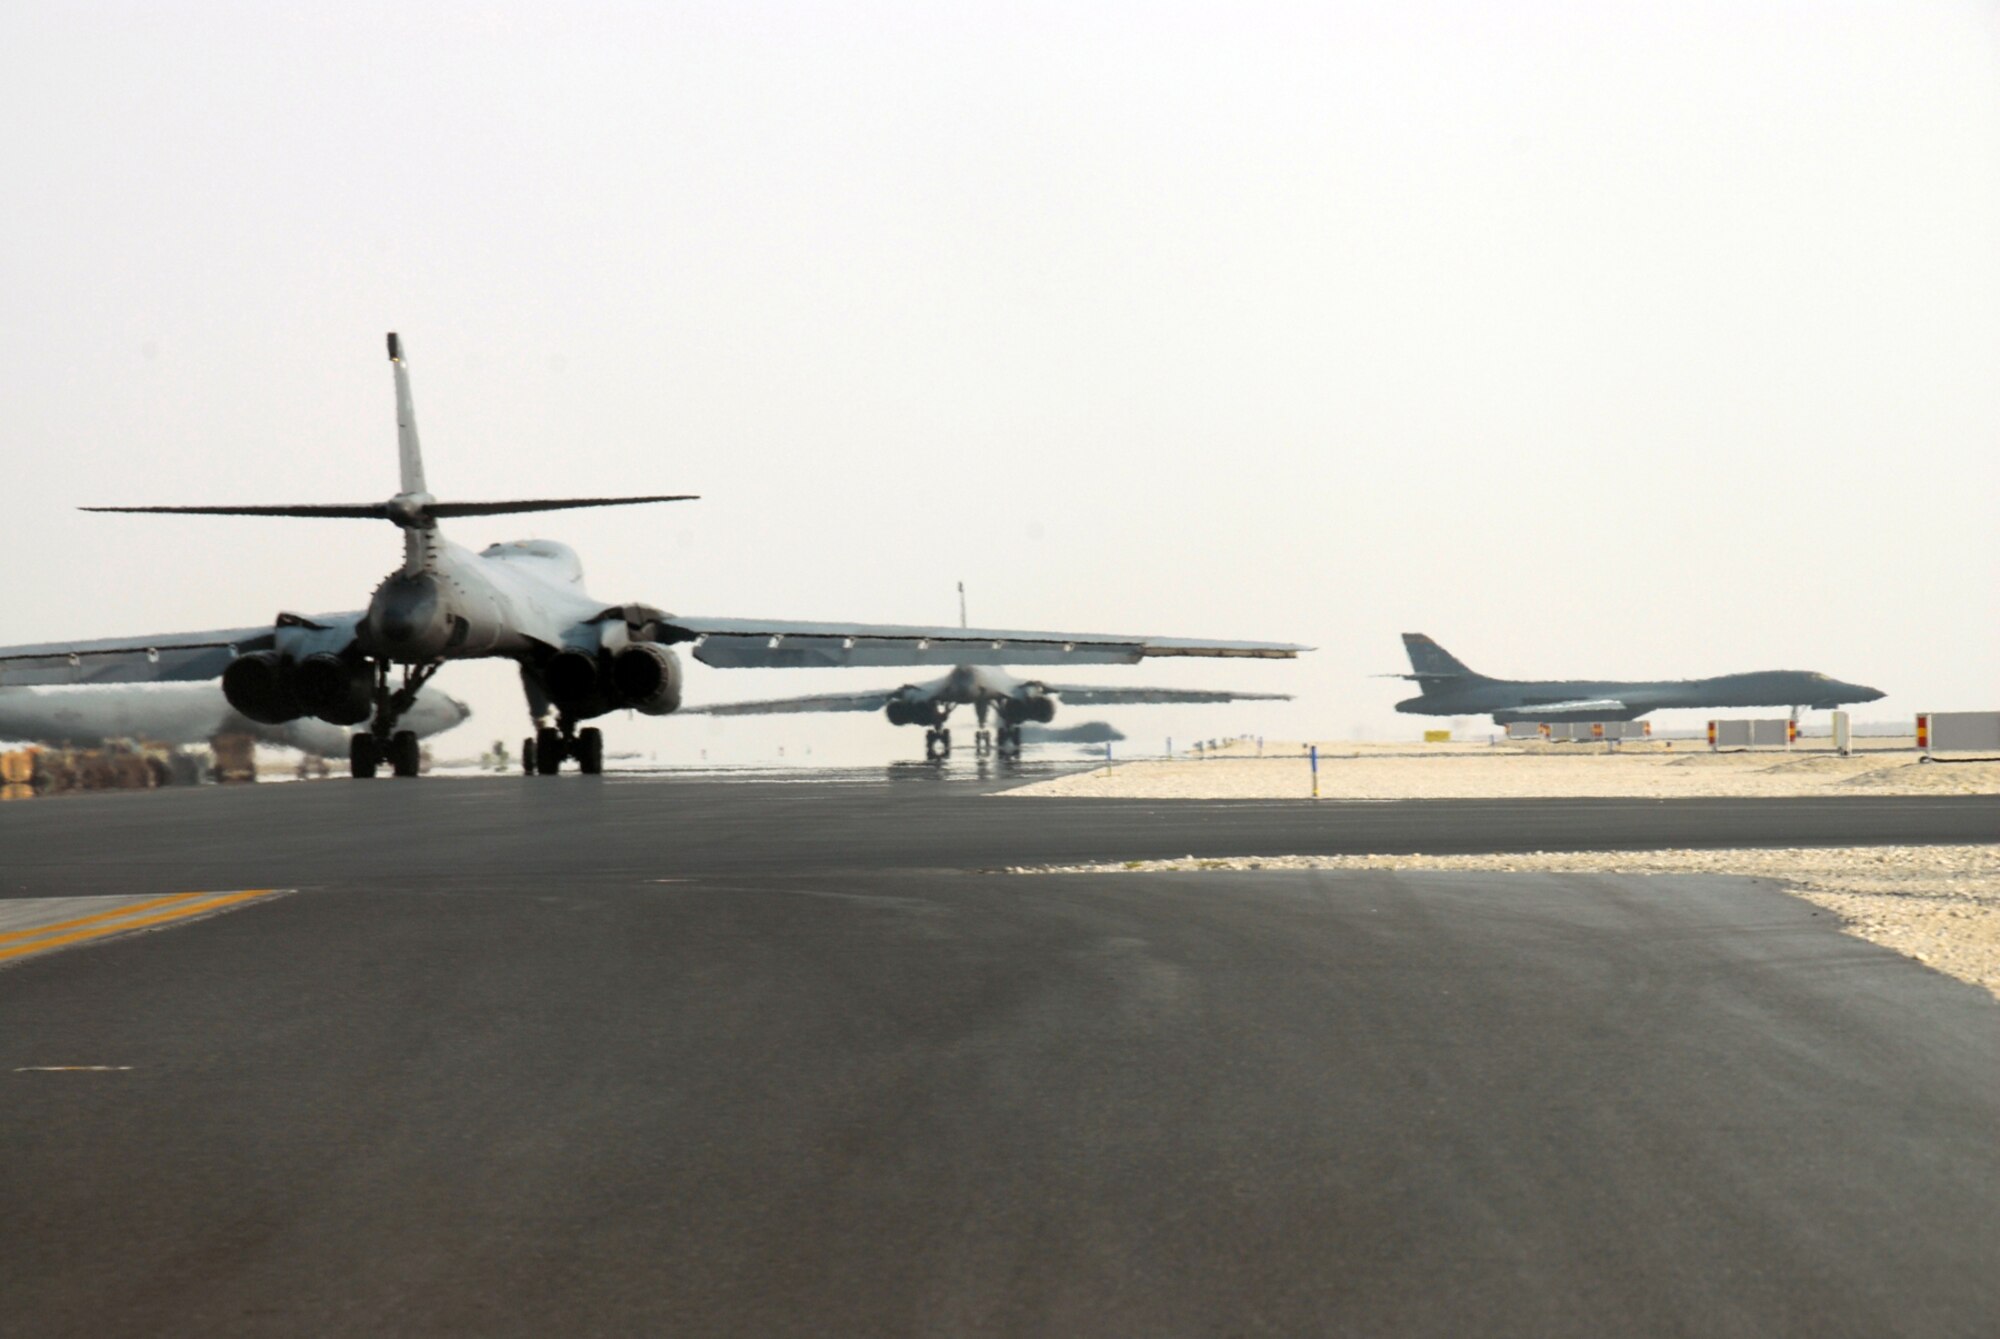 The 9th Expeditionary Bomb Squadron here flew B-1Bs in support of Operations Iraqi and Enduring Freedom. (U.S. Air Force photo by Airman 1st Class Ashley Tyler)